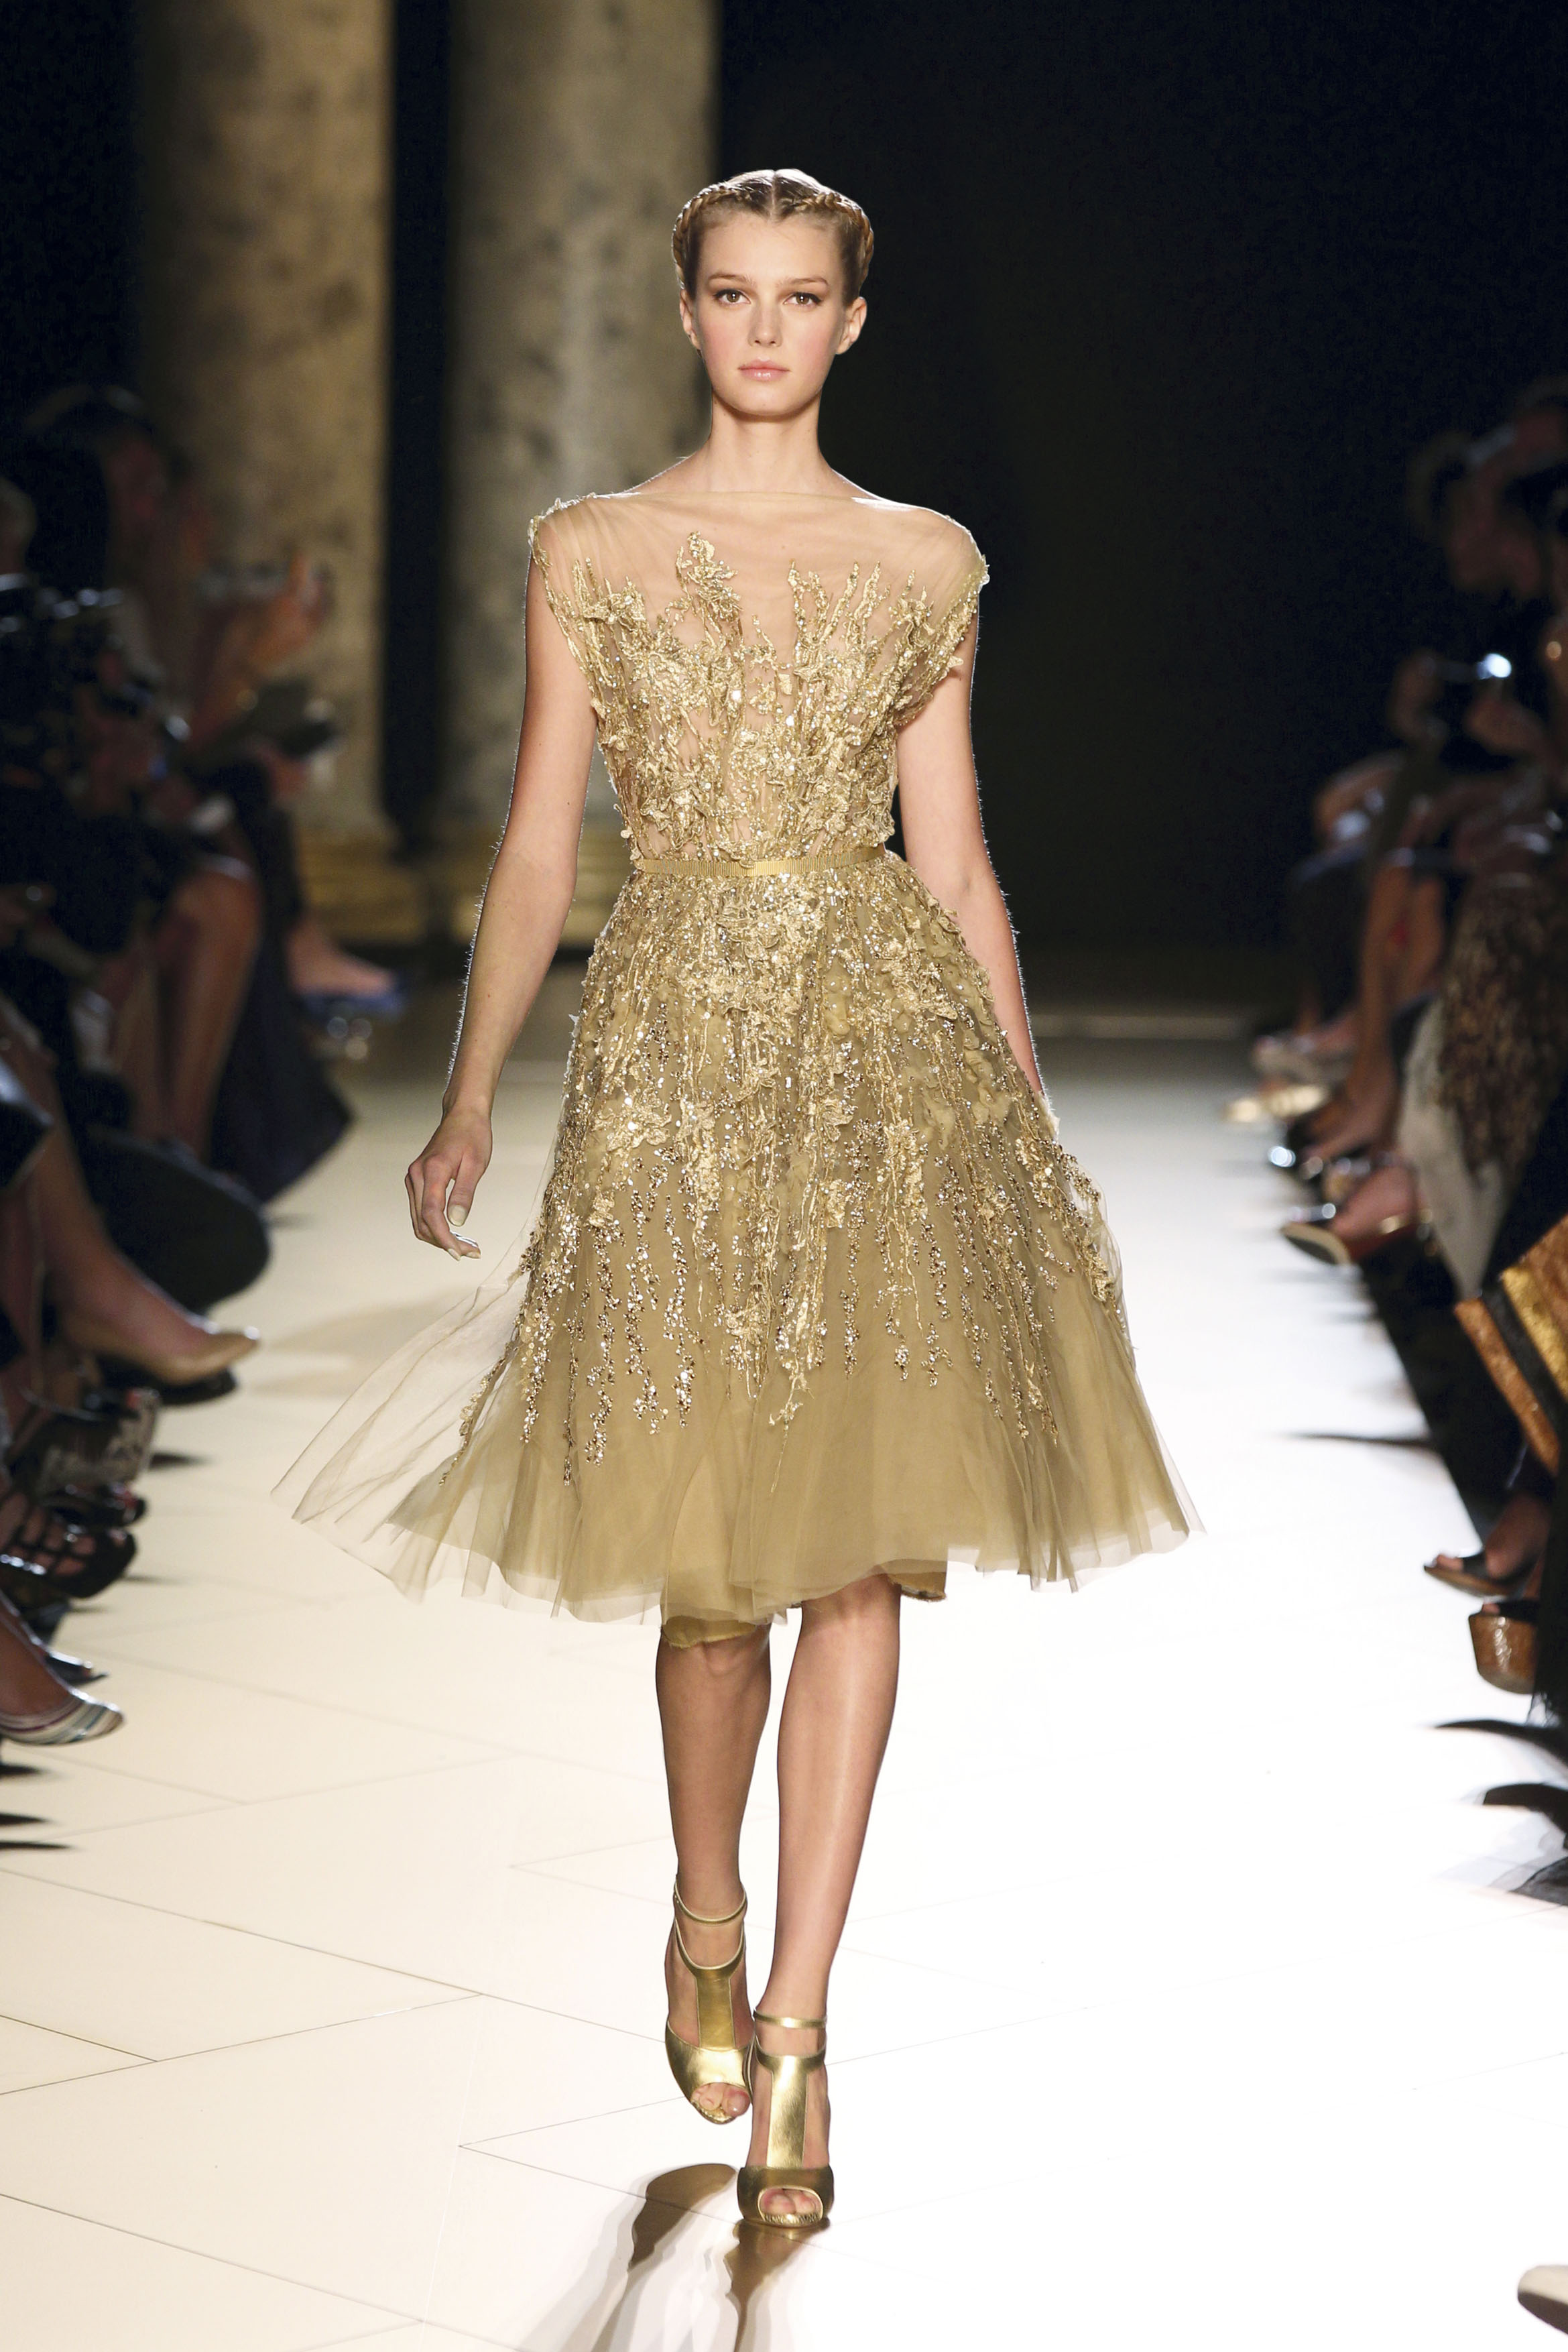 Fall 2012 Haute Couture: Elie Saab's Ottoman Spendours — CoutureNotebook